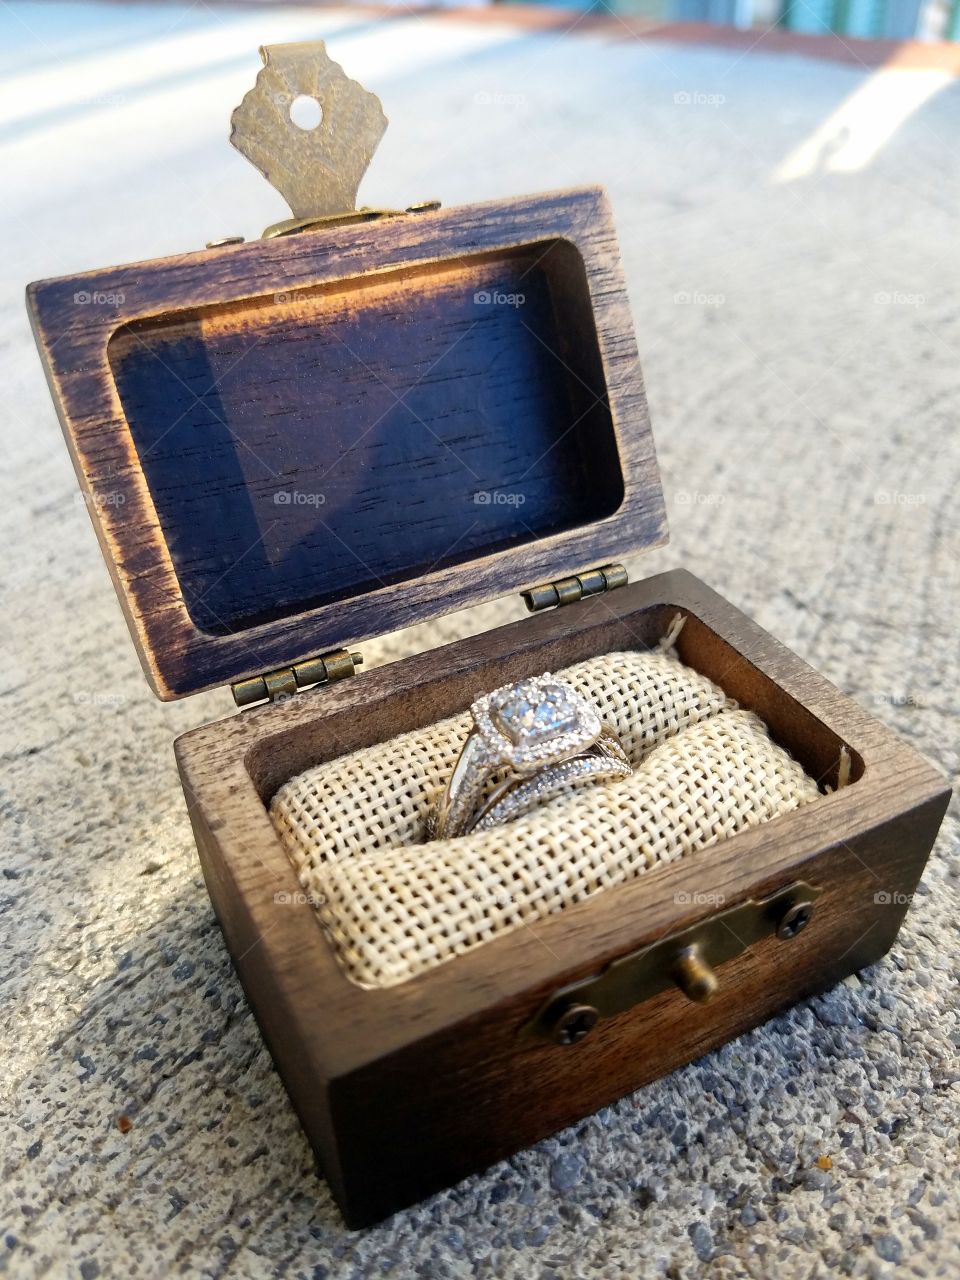 Diamond bridal ring set in a custom wooden box by LuxWoods